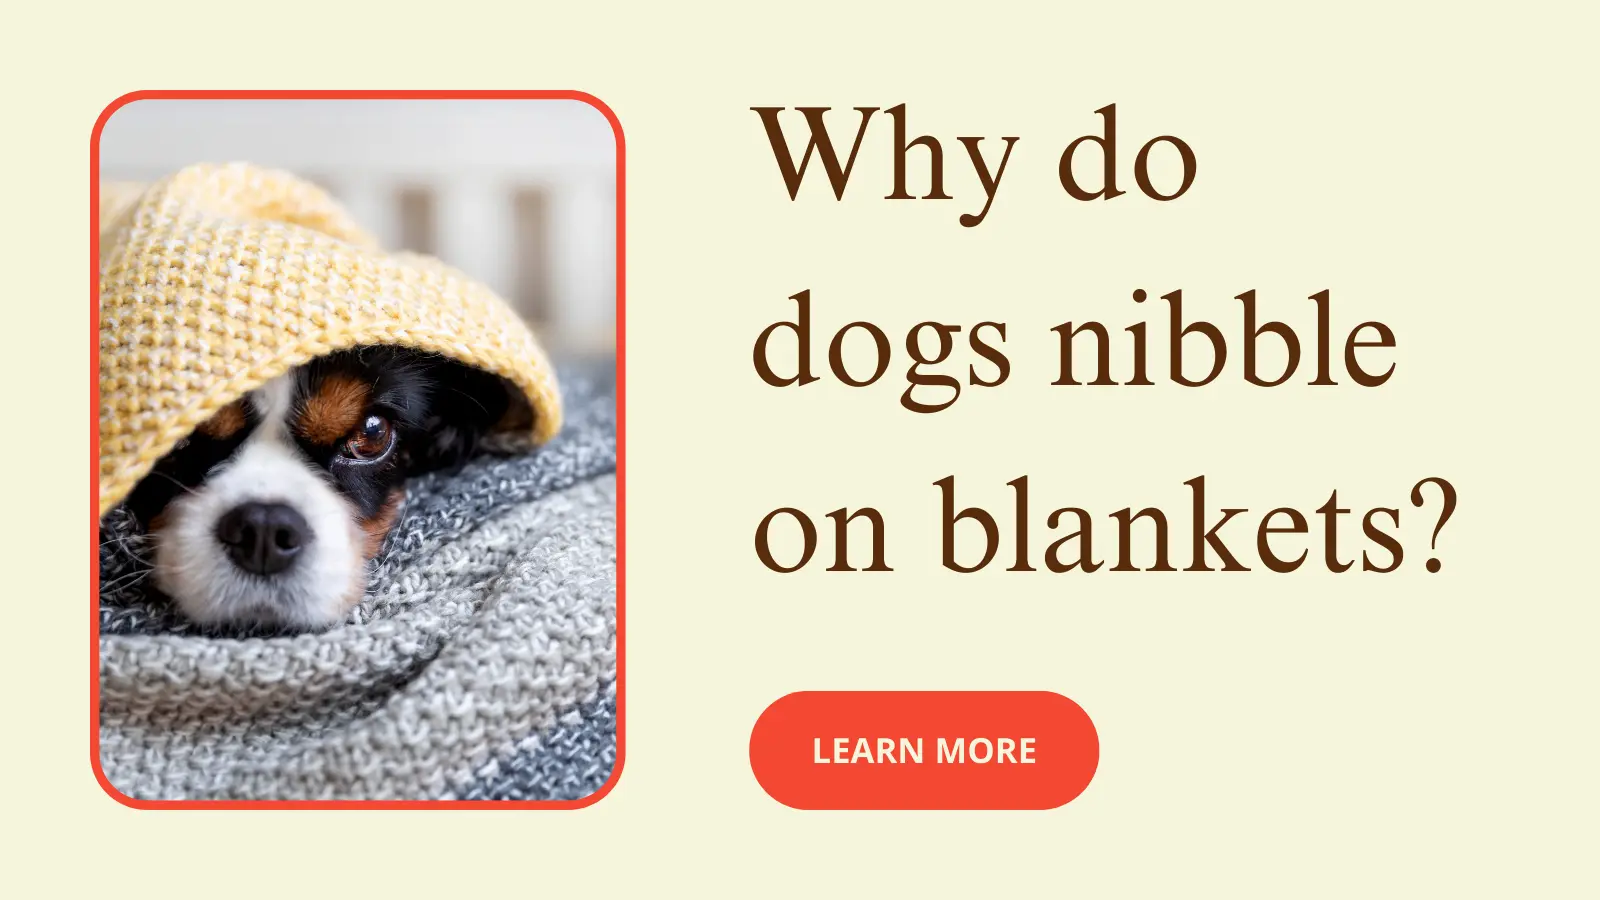 Why do dogs nibble on blankets